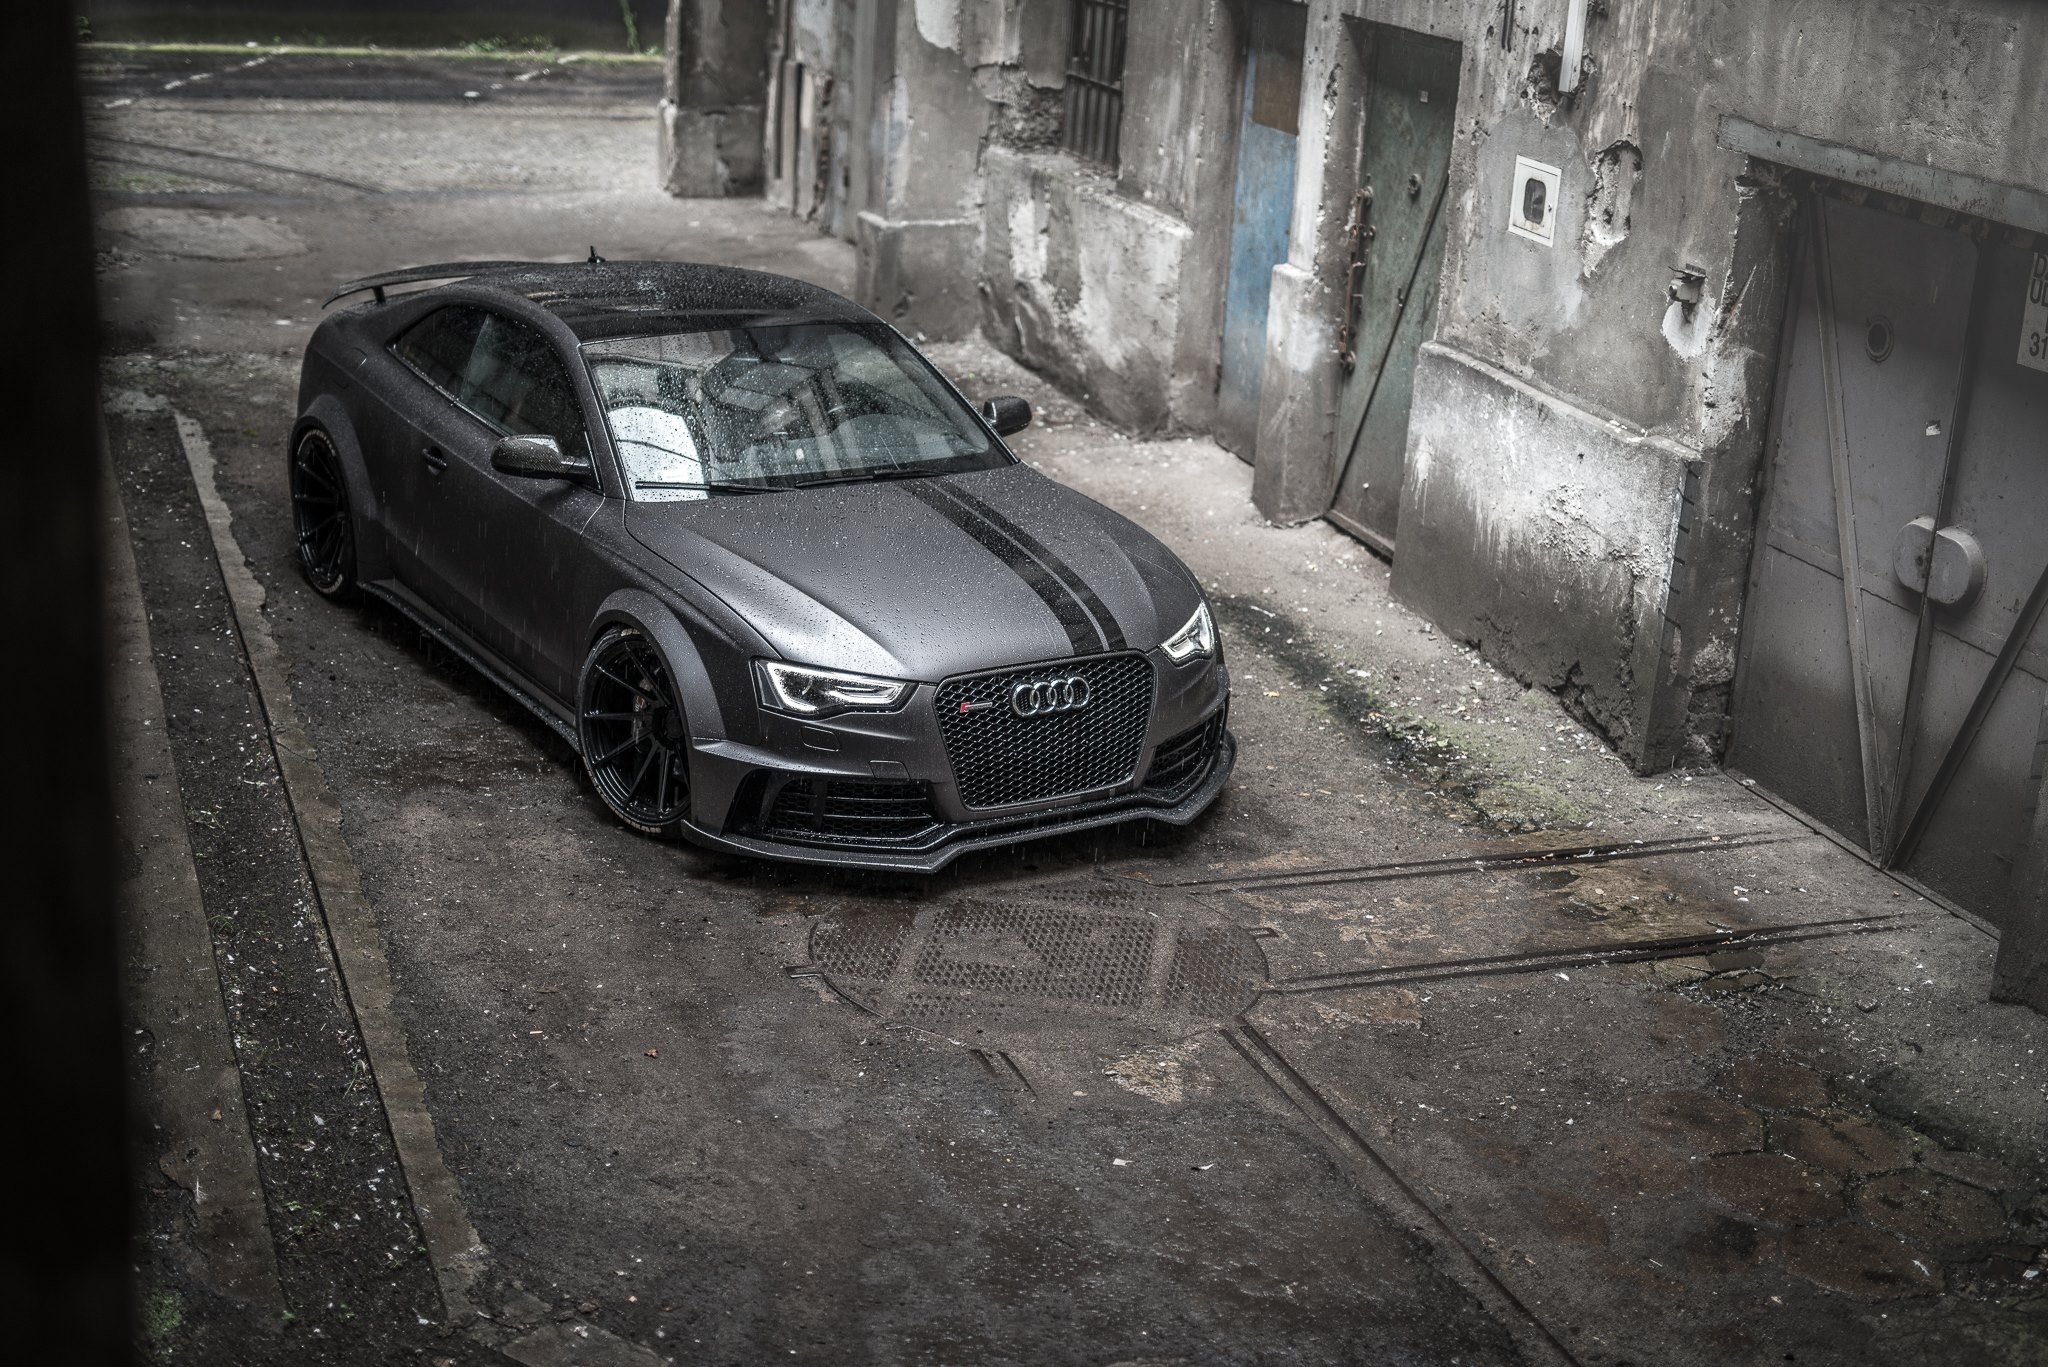 Supercharged Audi S5 SR66 wide body kit.